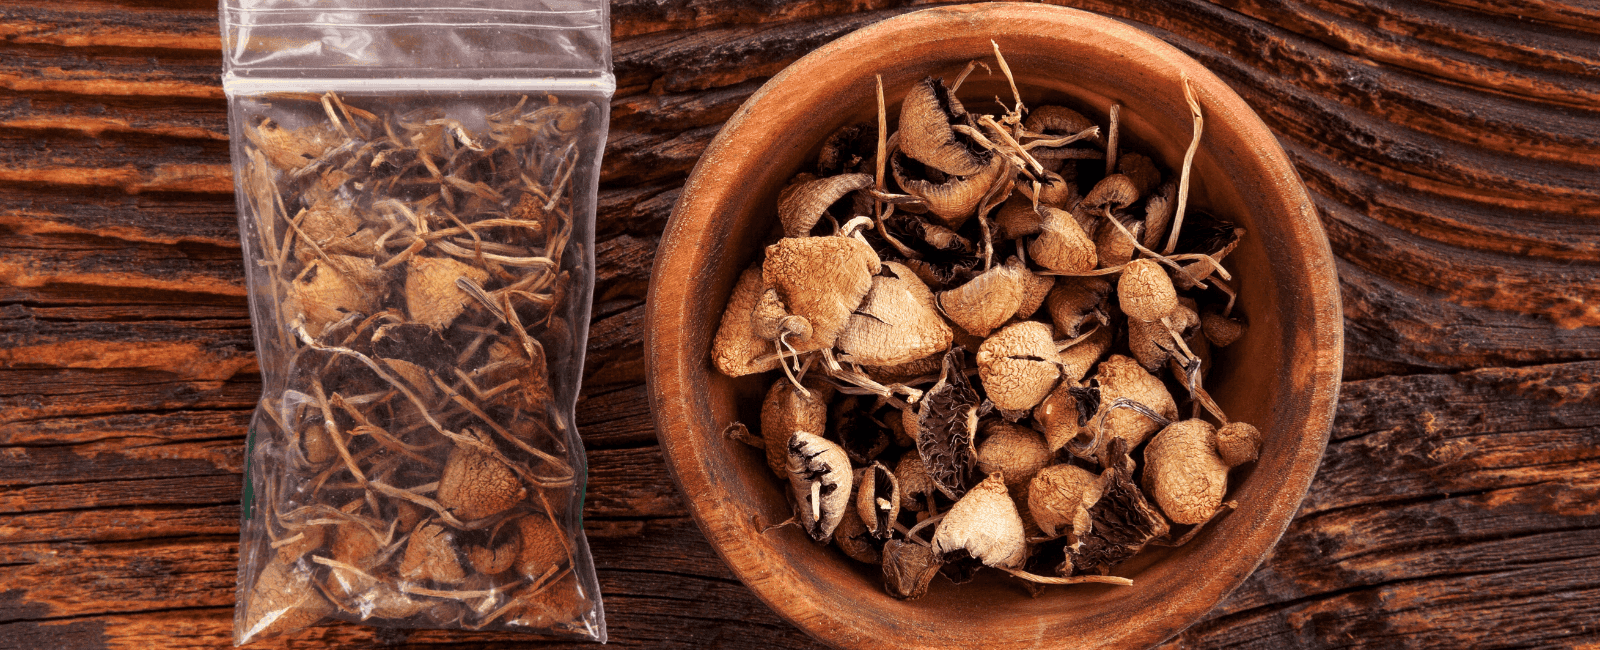 Psilocybin May Improve the Well-Being of Healthy Individuals, According to New Study